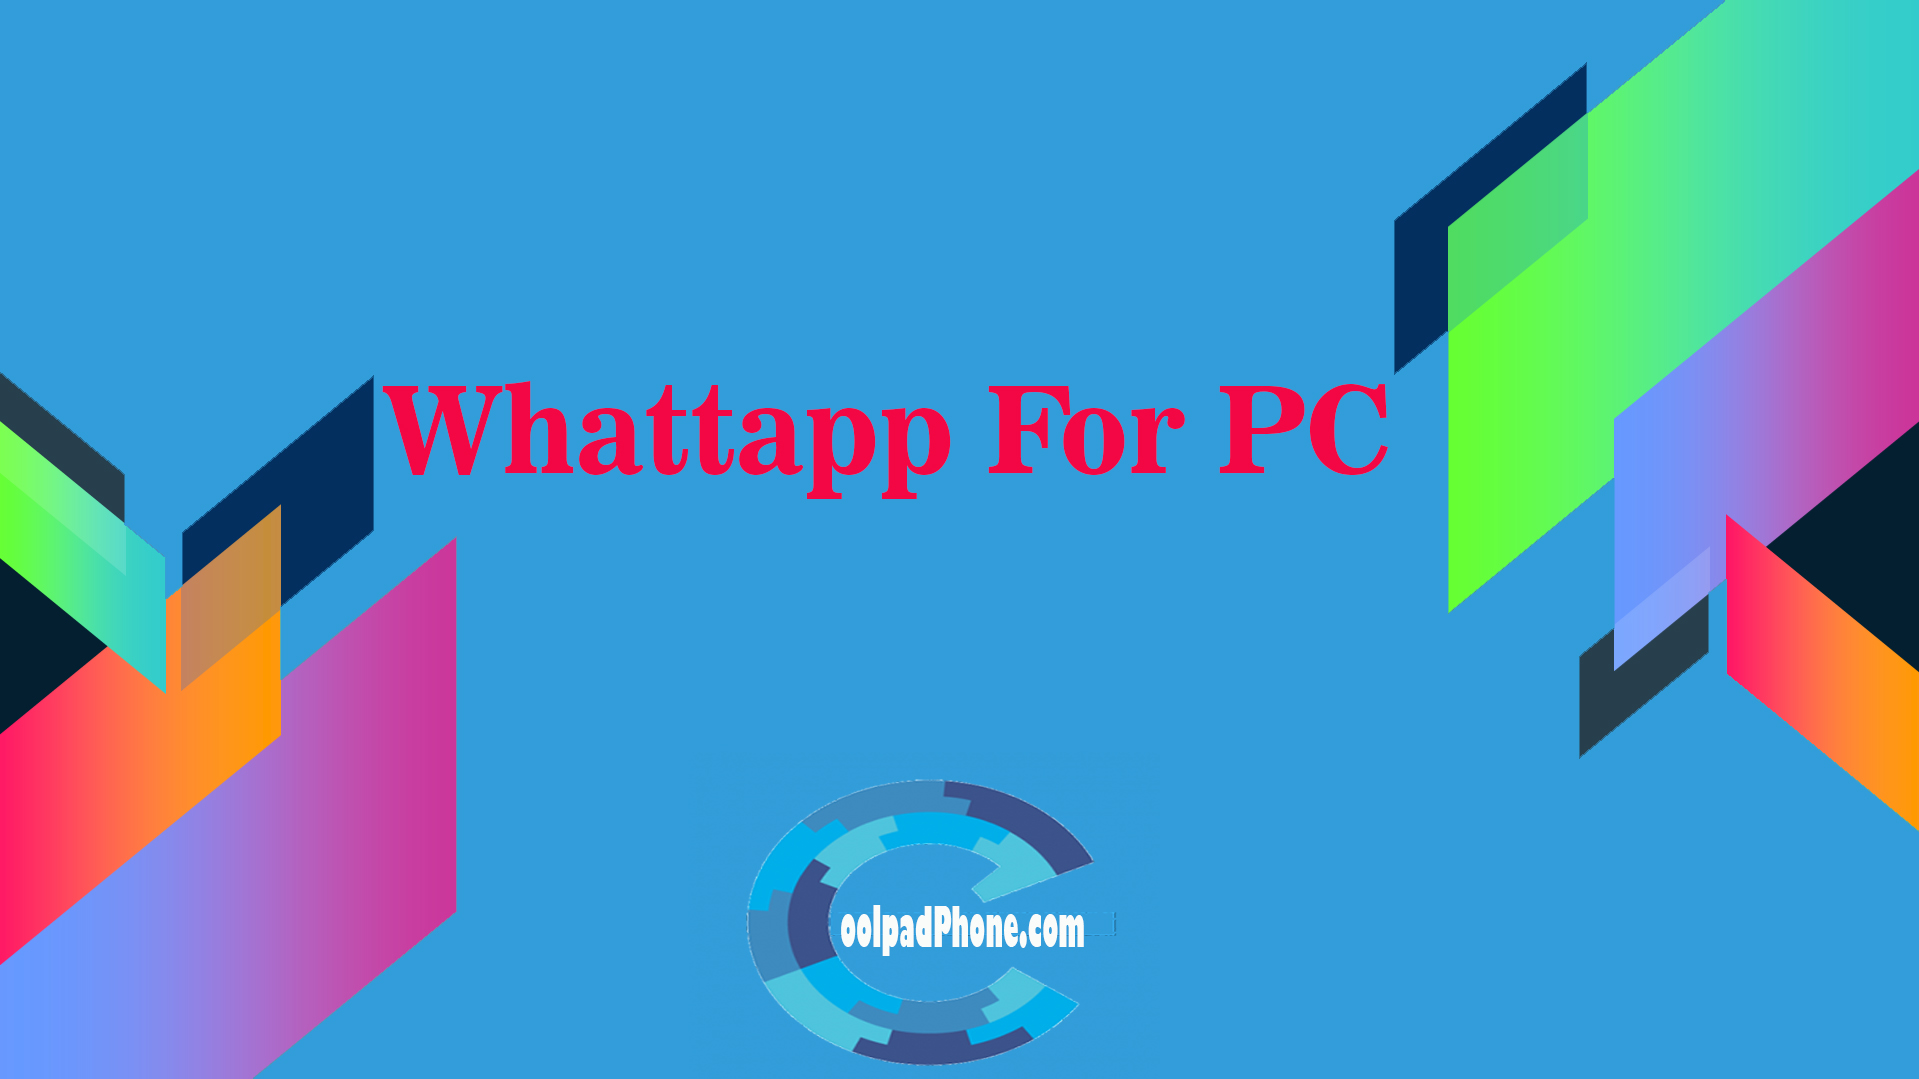 Whattapp For PC